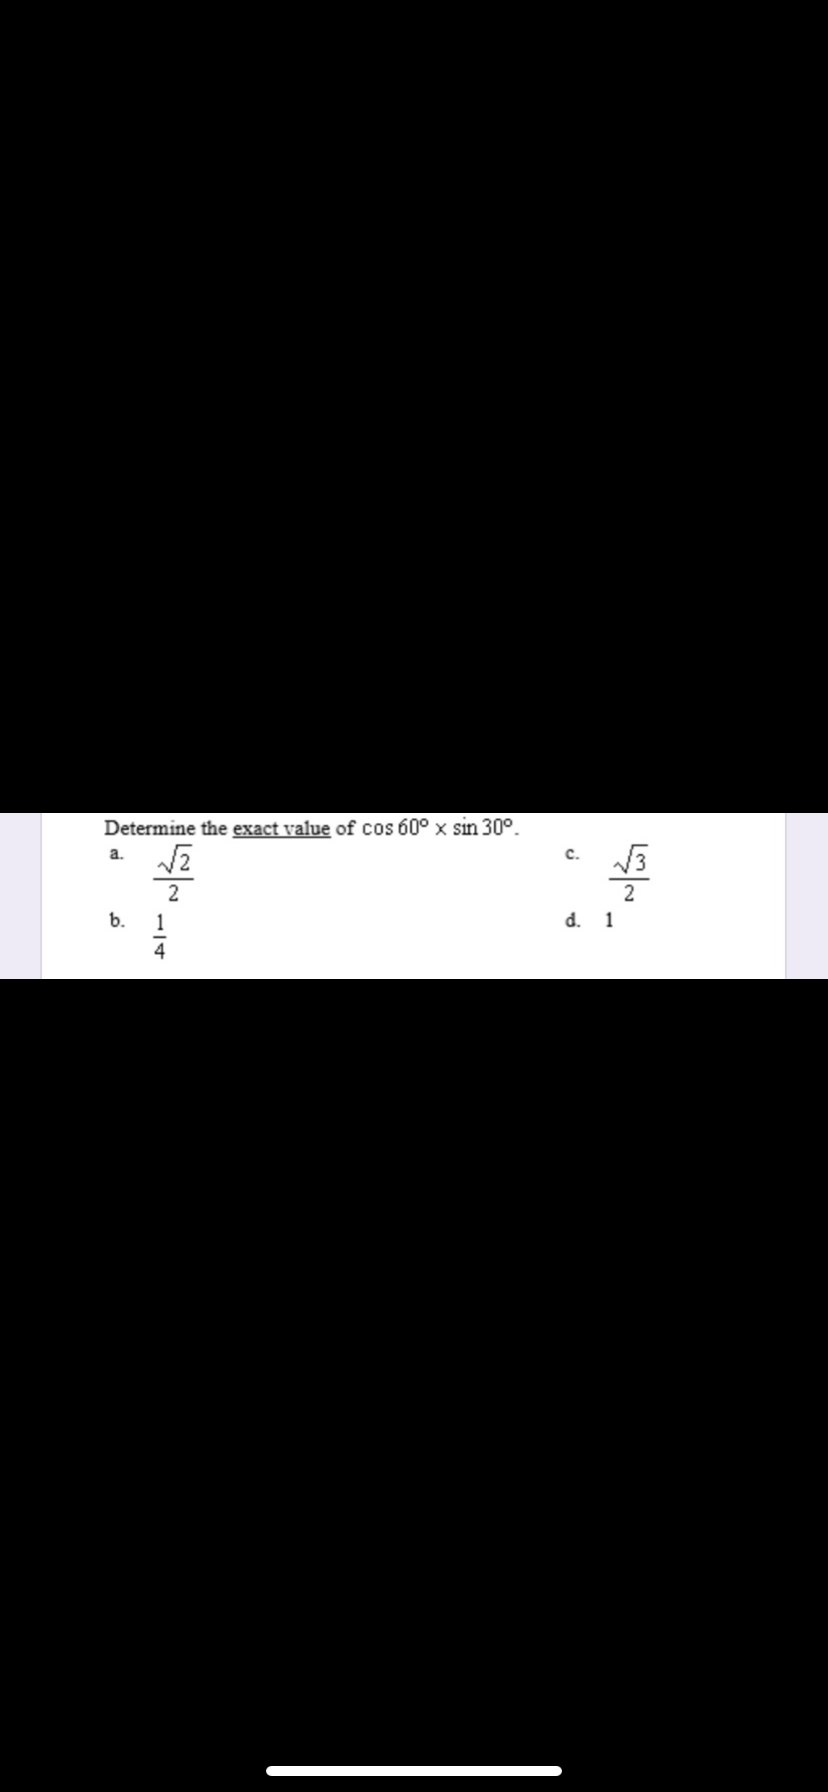 Determine the exact value of cos 60° x sin 30°.
a.
2
d. 1
b.
1
4
